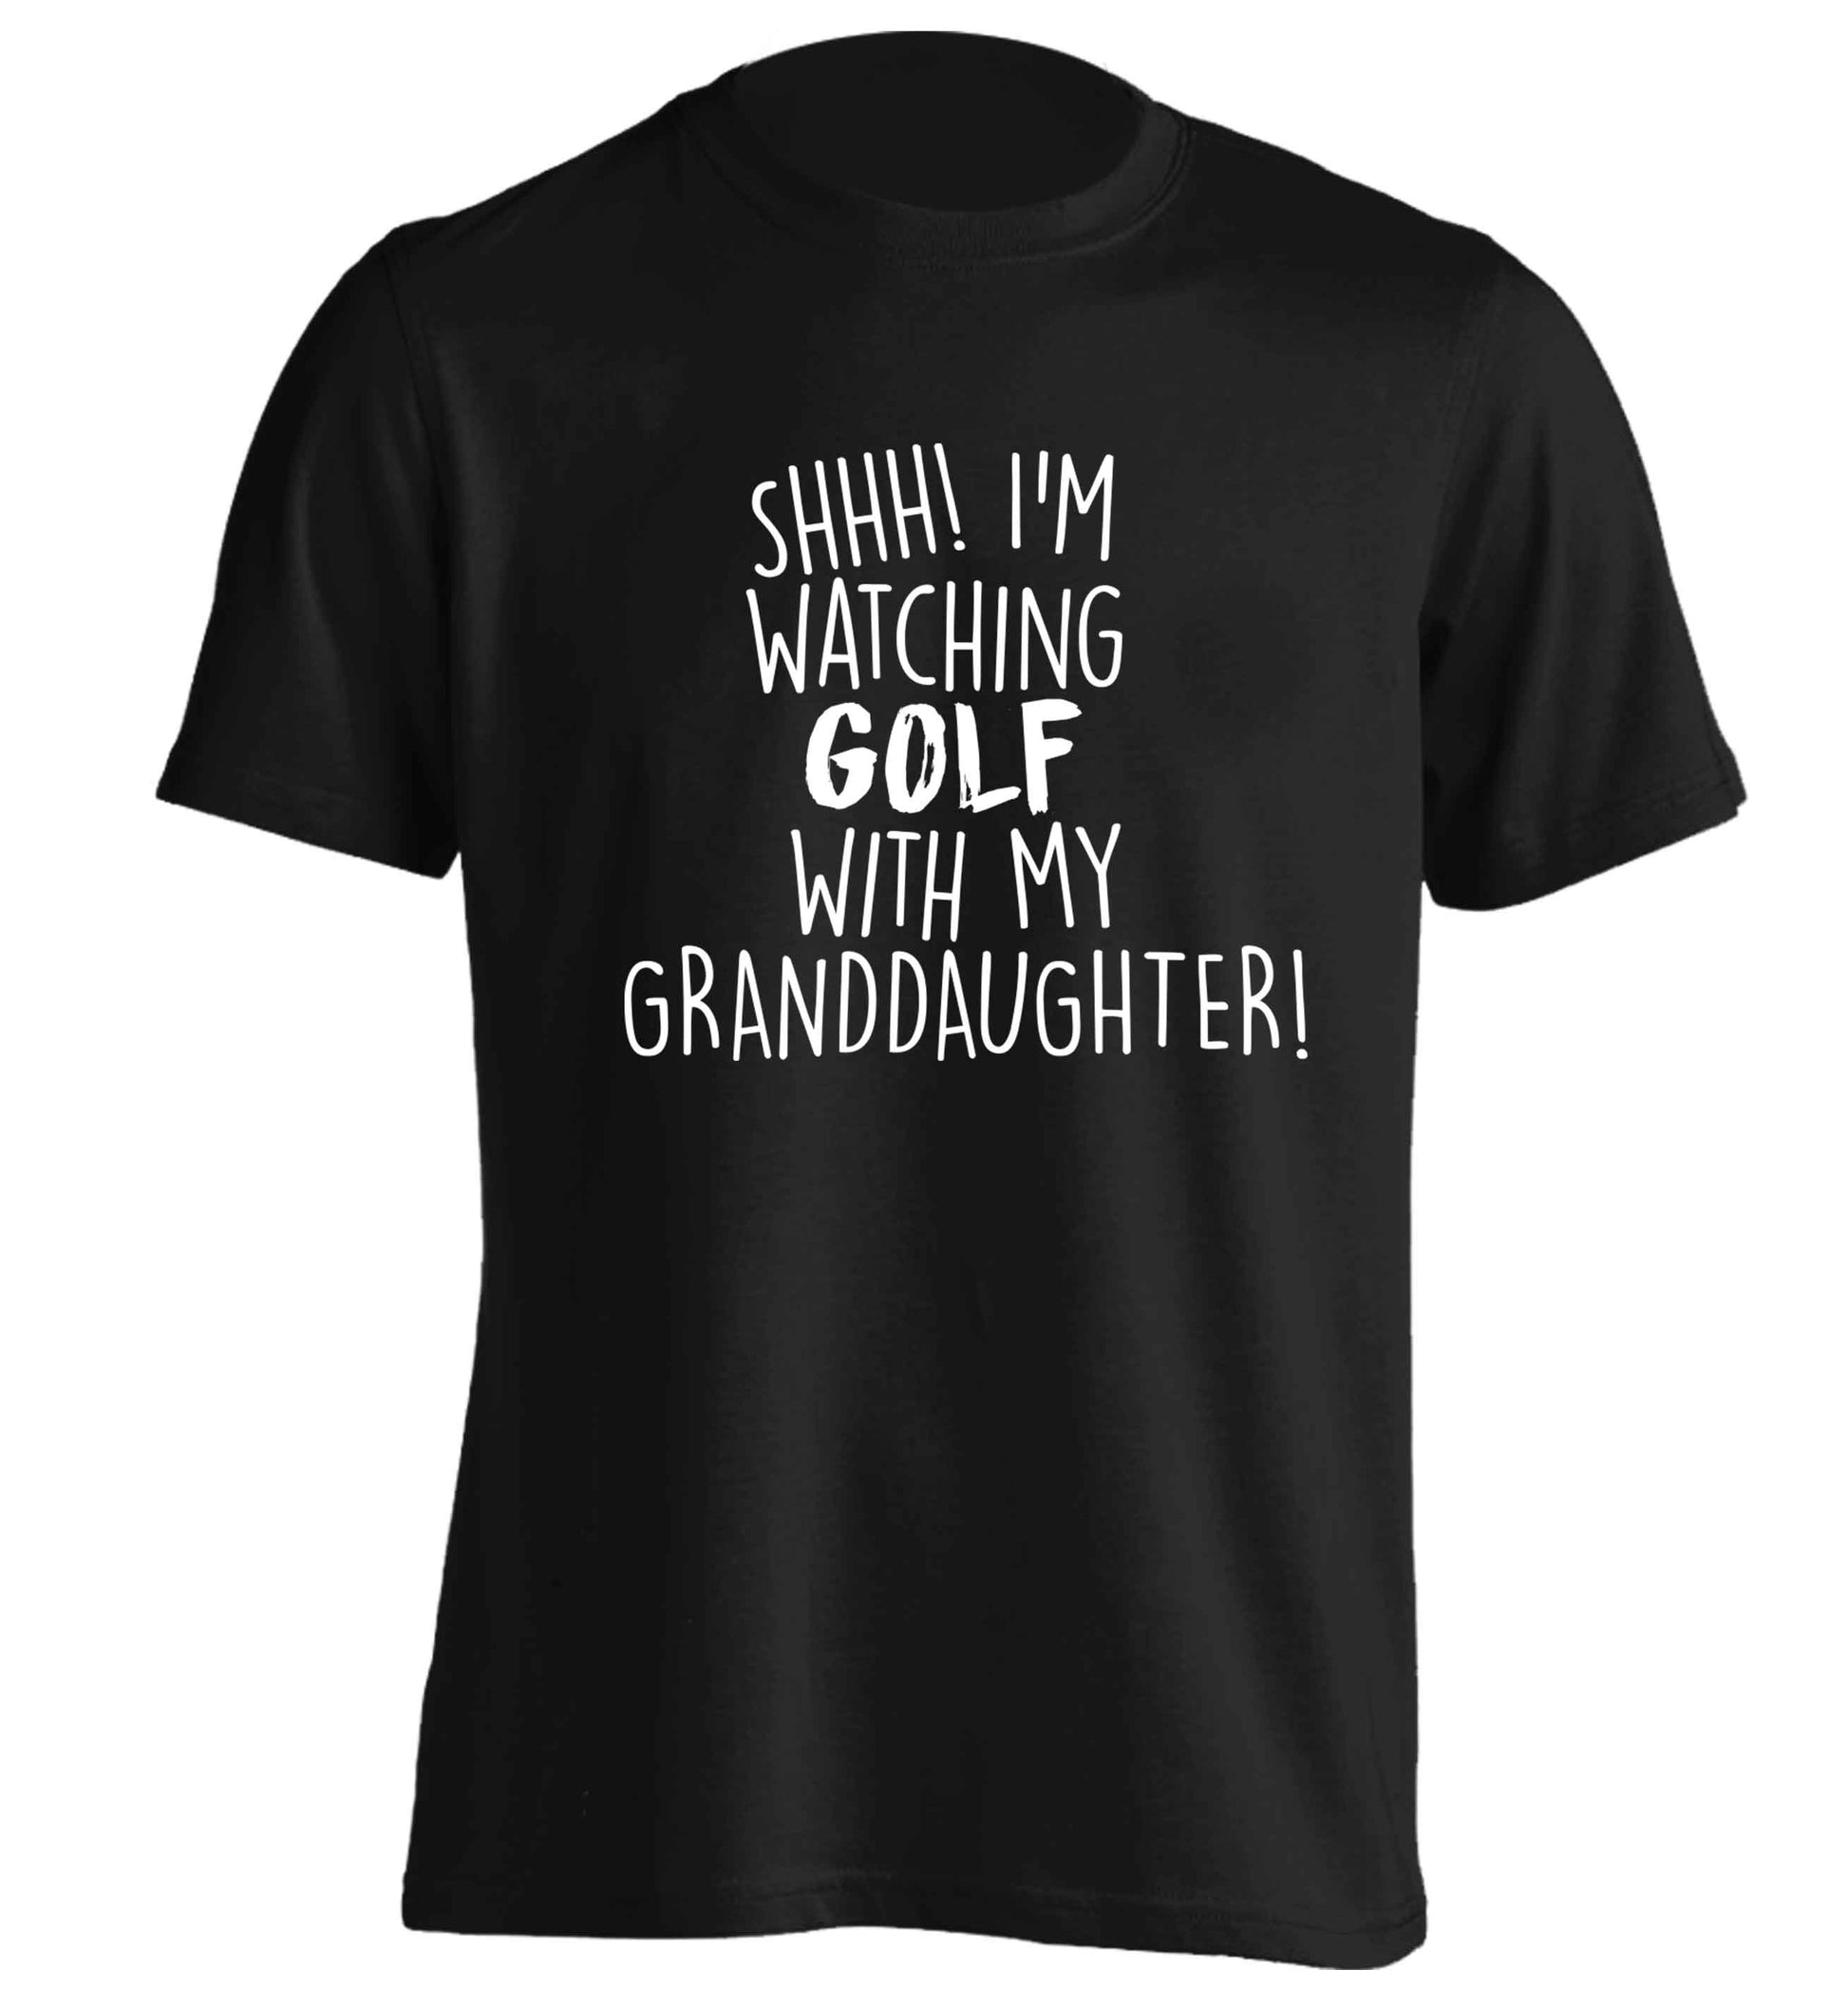 Shh I'm watching golf with my granddaughter adults unisex black Tshirt 2XL